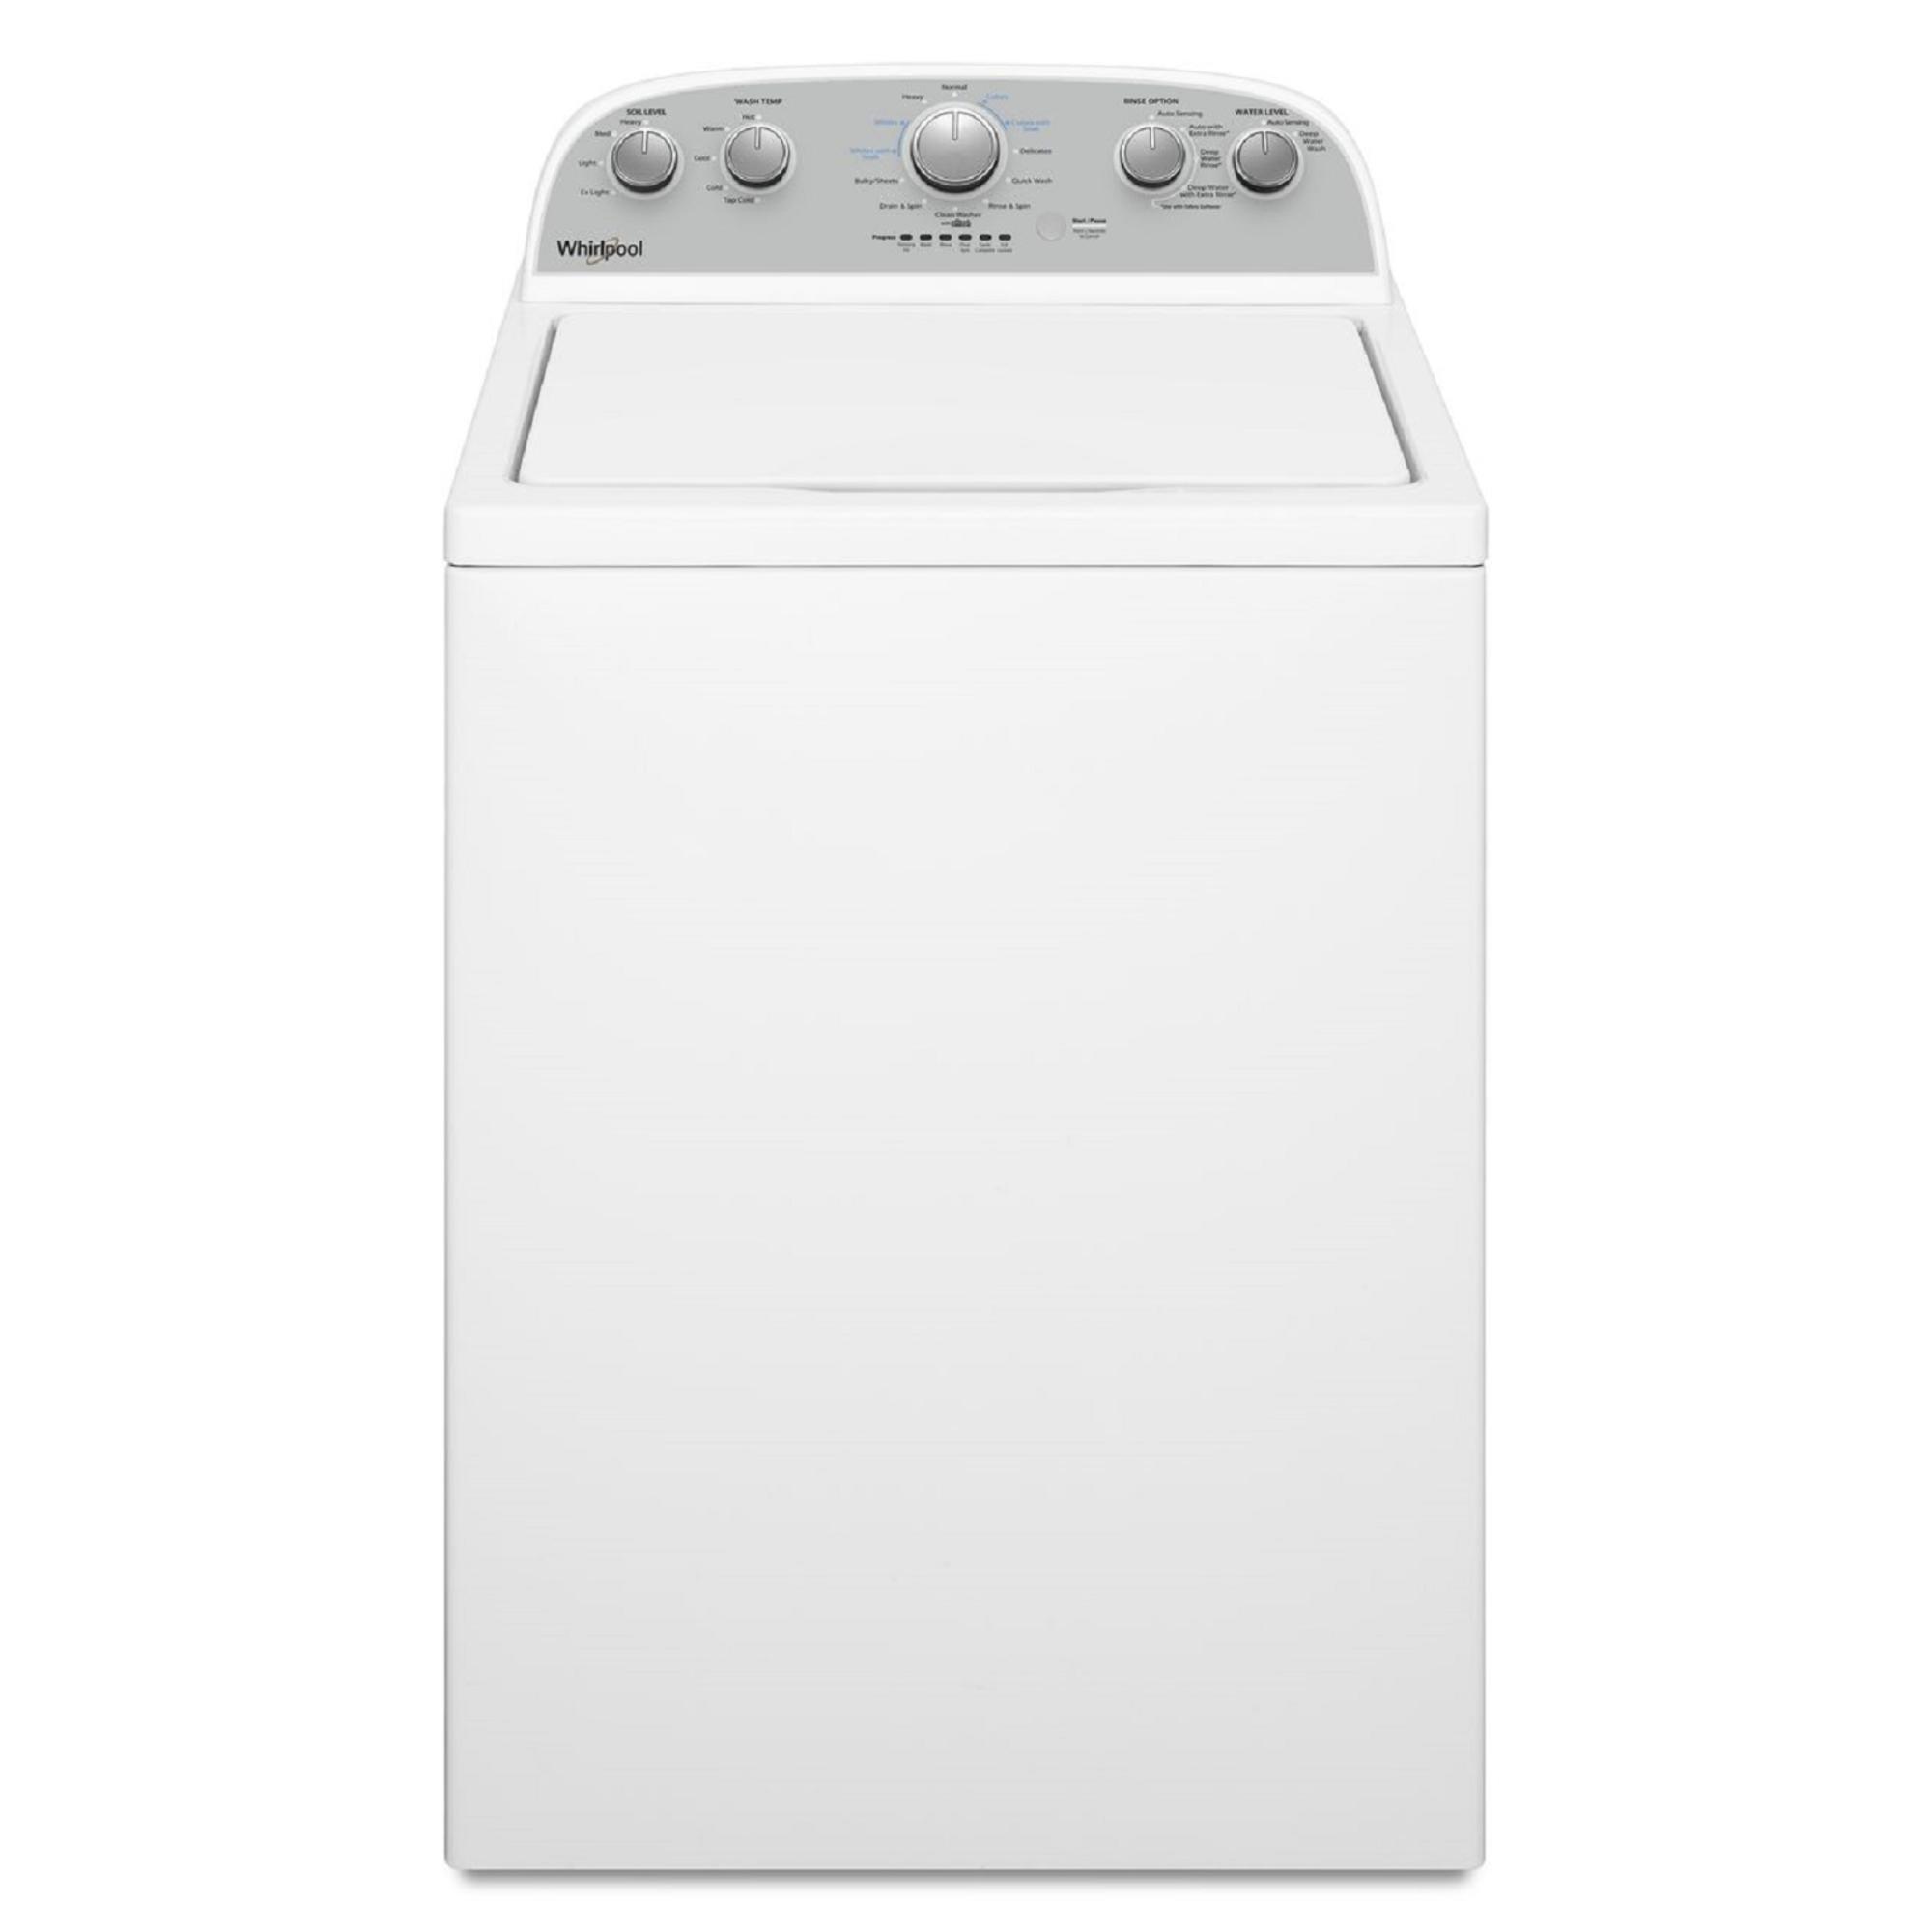 Whirlpool WTW4950HW 3.9 Cu. Ft. Top Loading Washer with Soaking Cycles in White